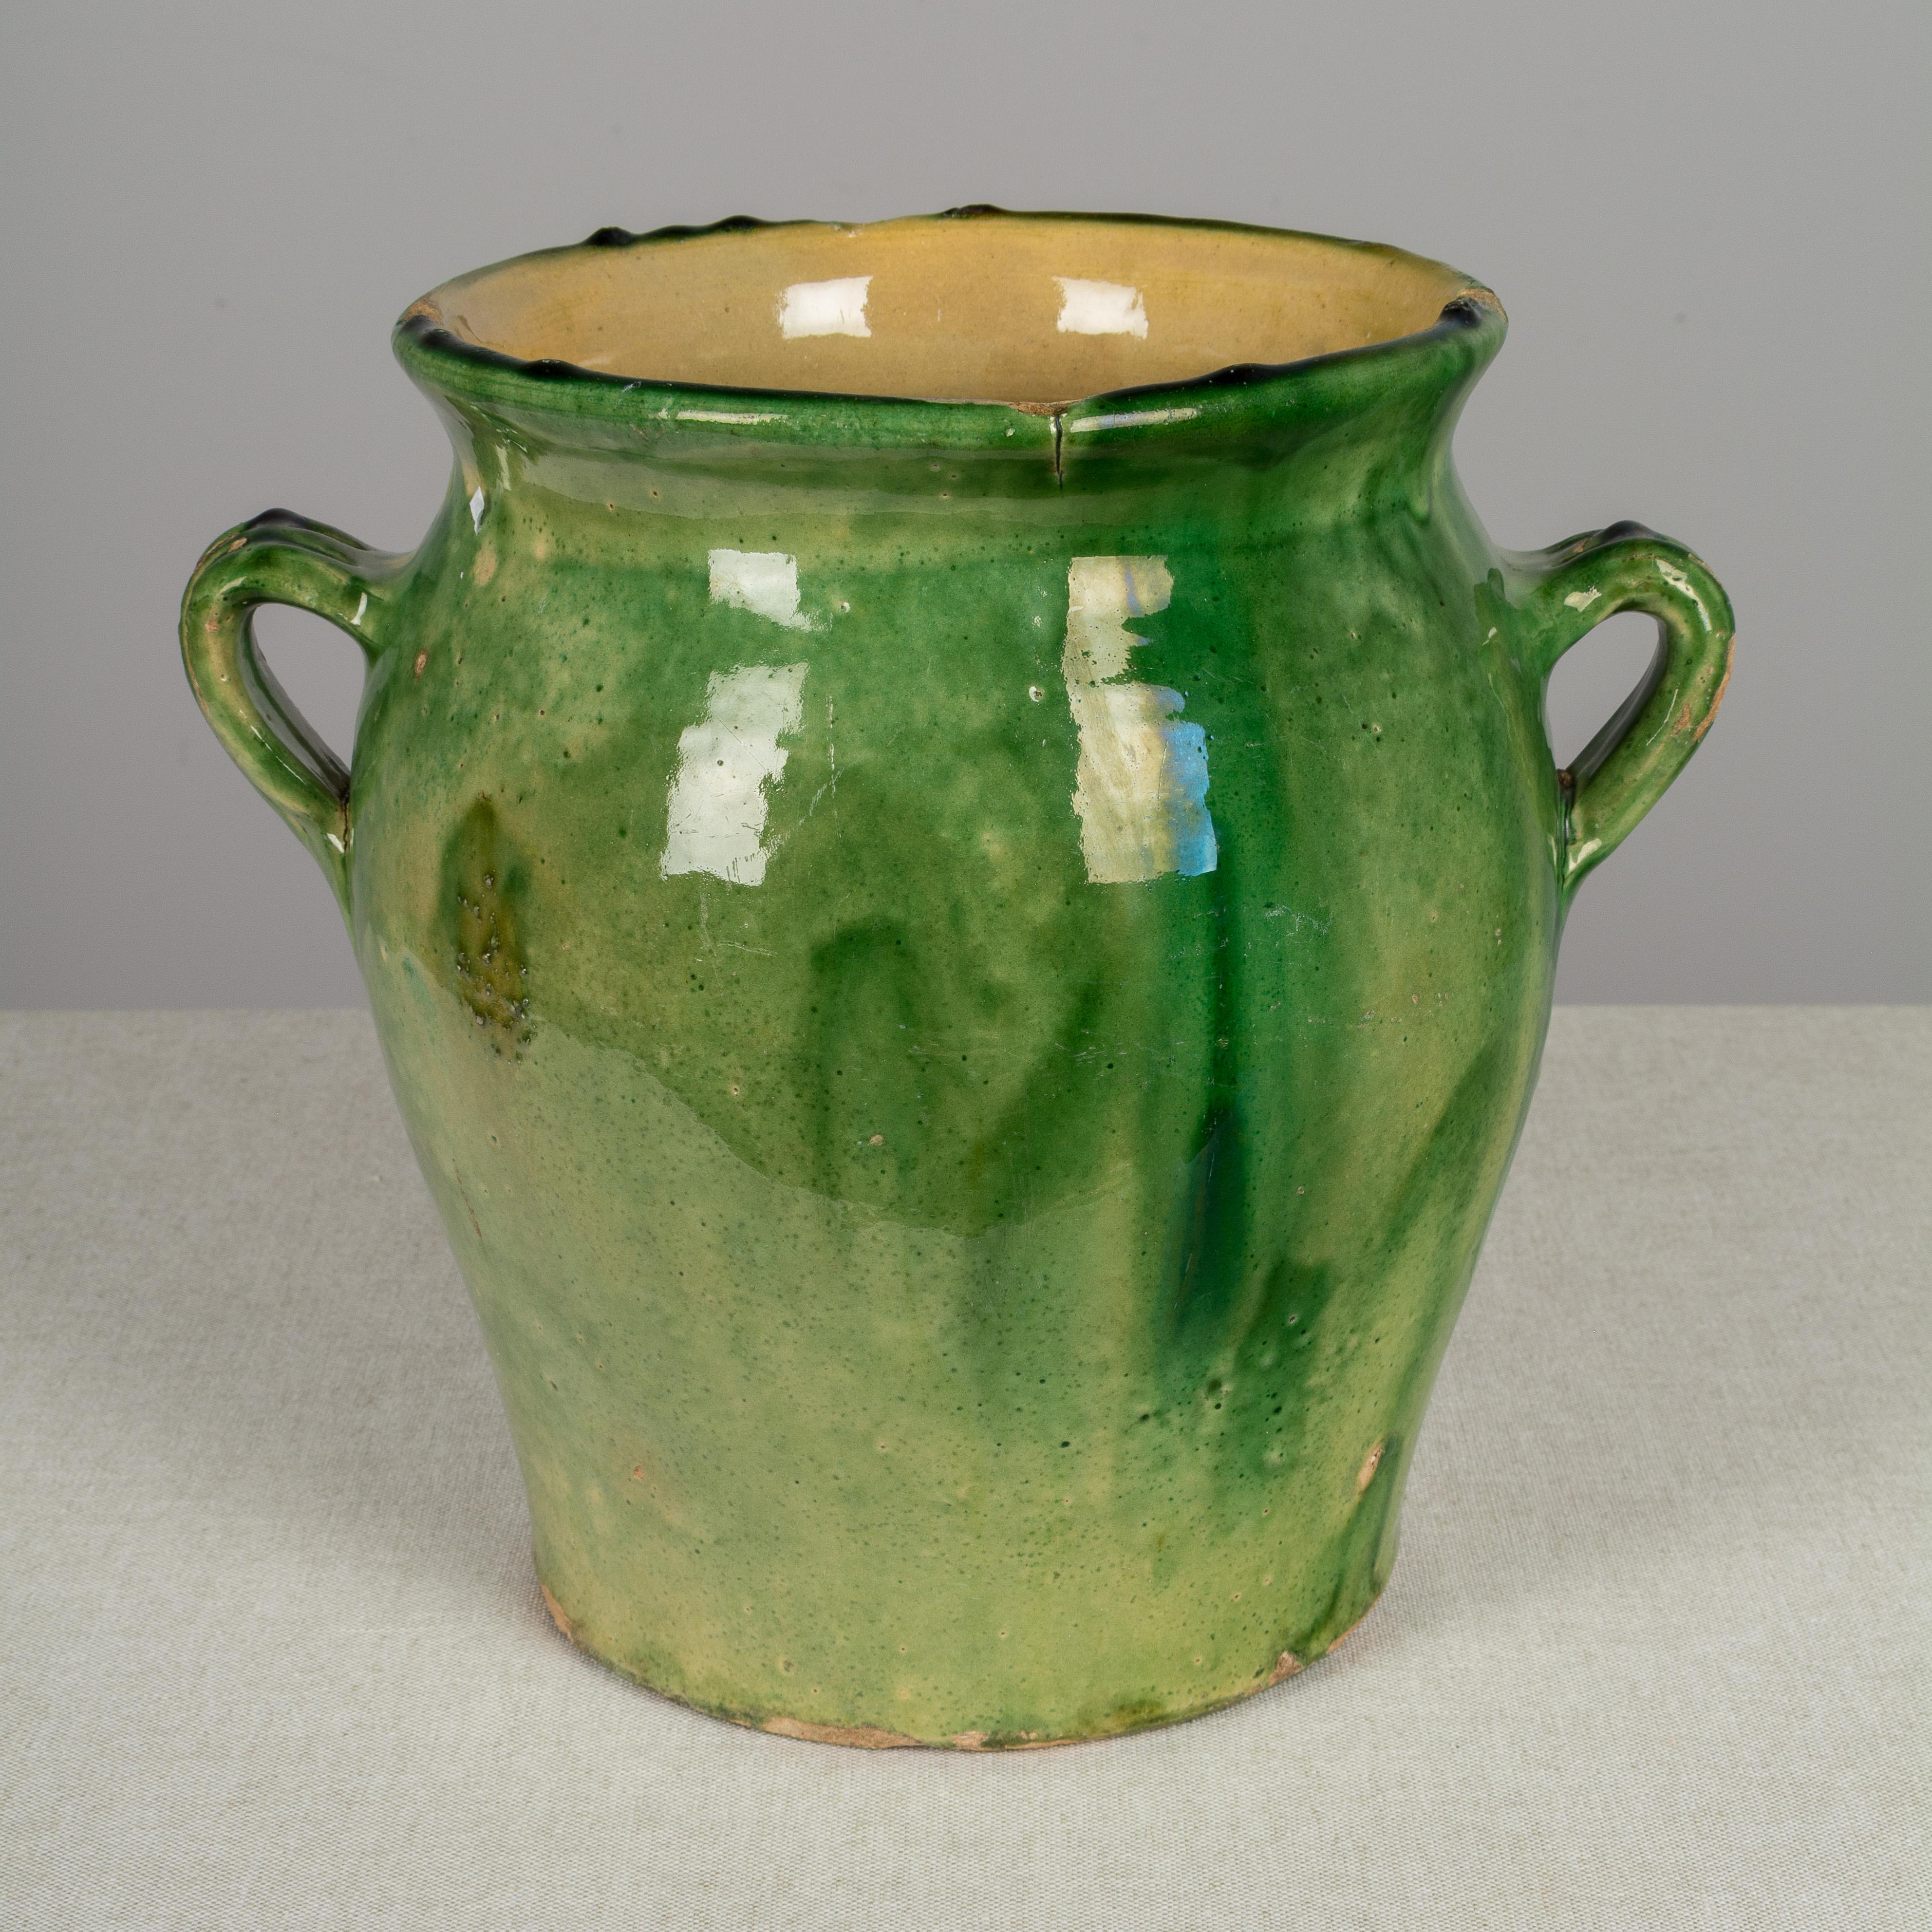 An earthenware confit pot from the Southwest of France with traditional green glaze. These ordinary earthenware vessels were once used daily in the French country home and have beautiful rustic glazes of green, ochre and terracotta. Nice decorative